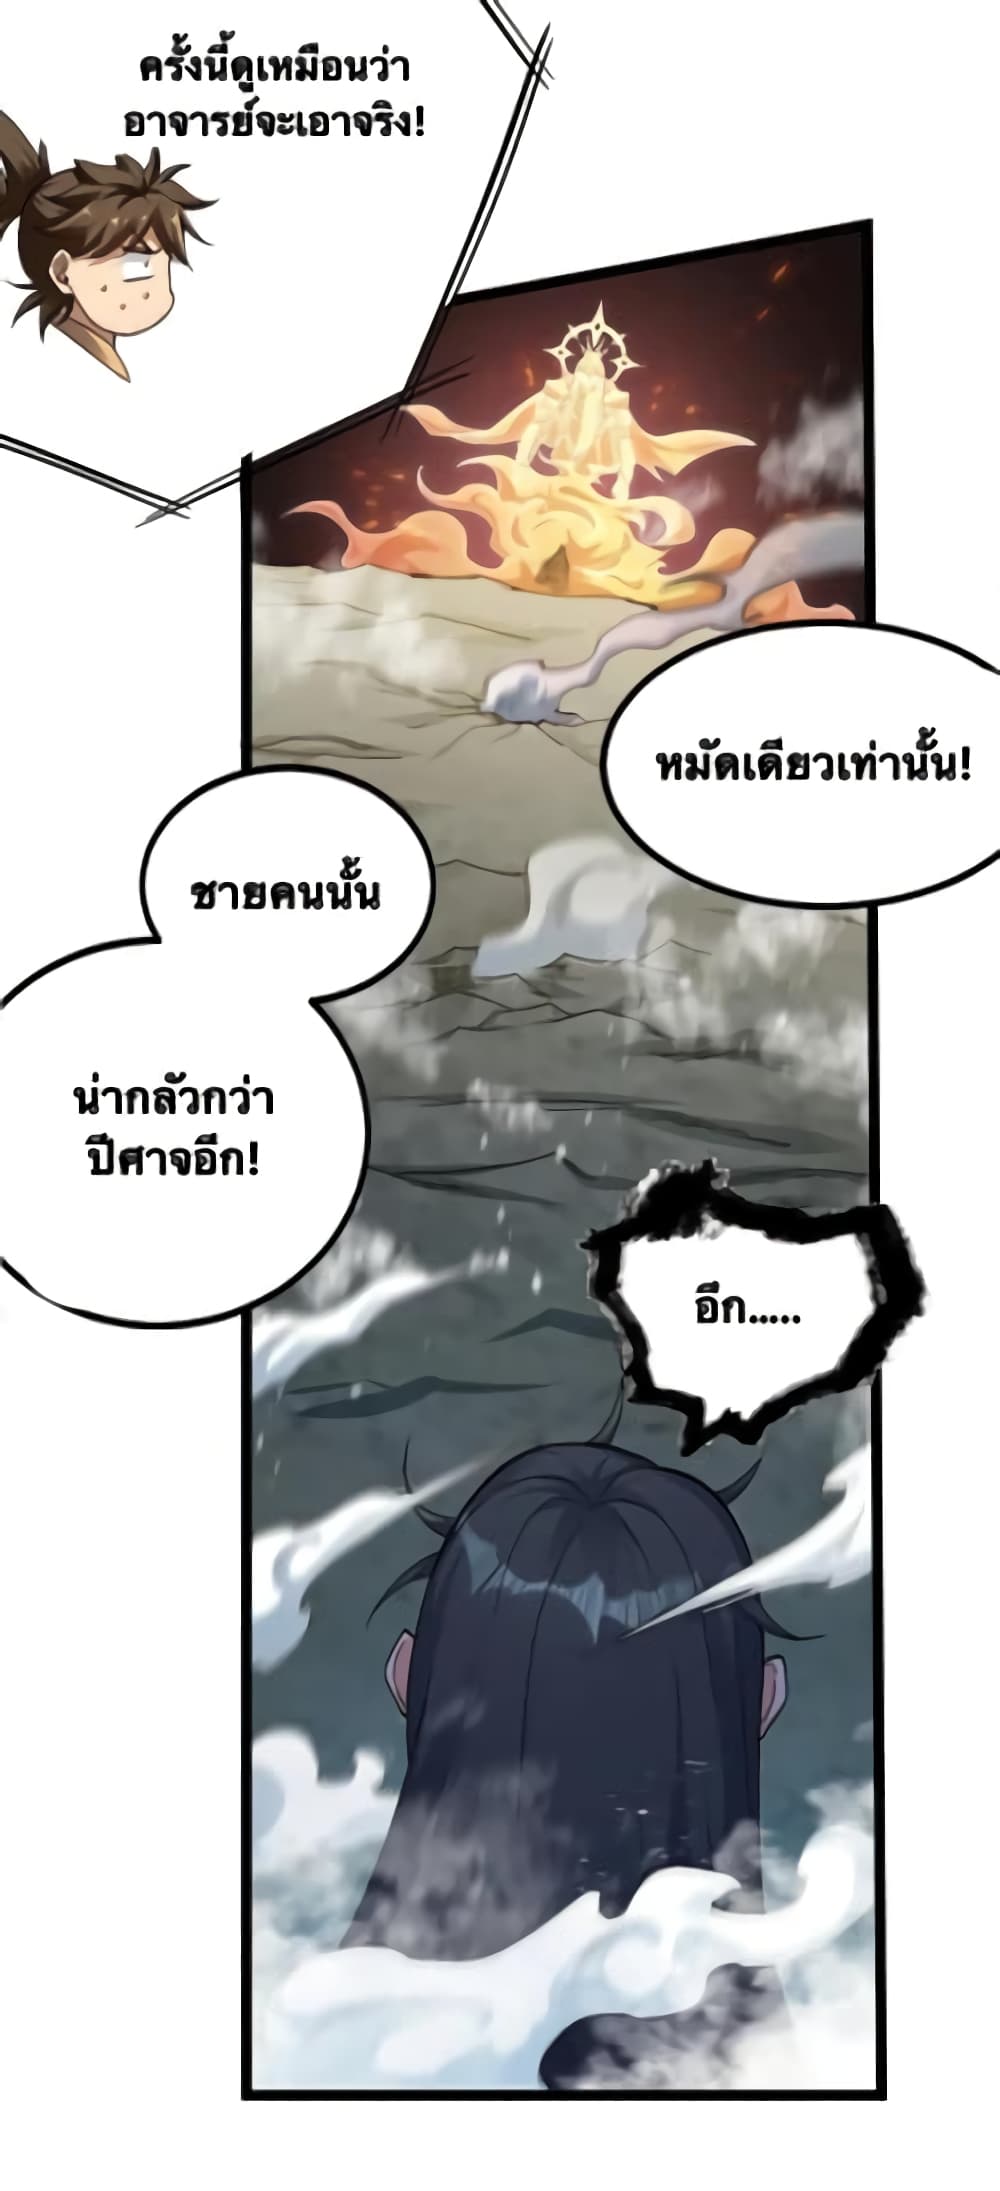 Godsian Masian from Another World ตอนที่ 89 (18)